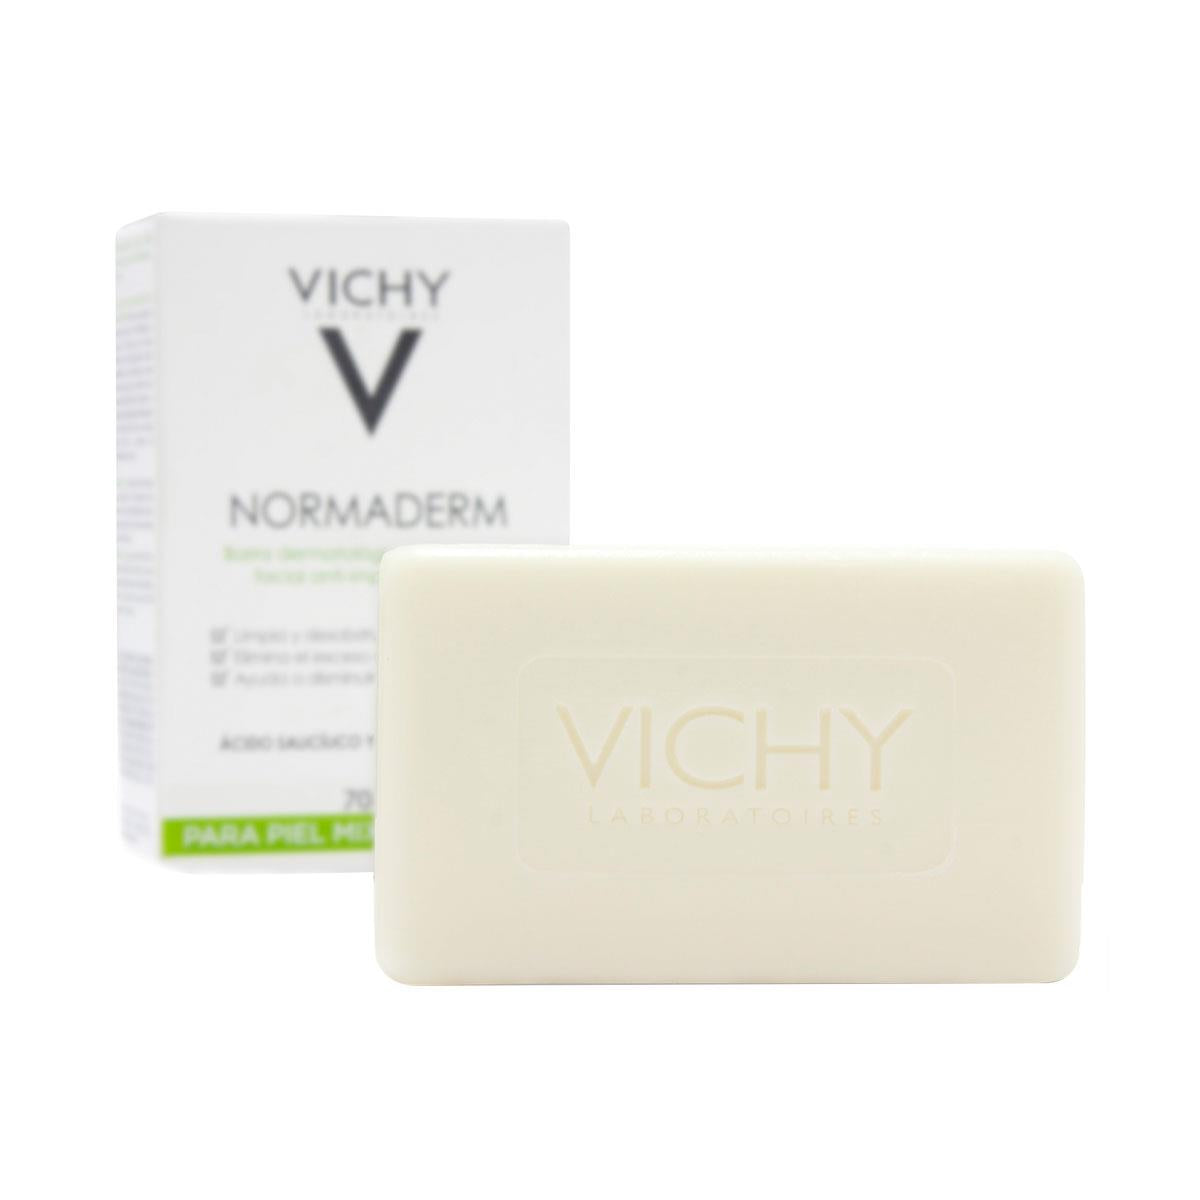 VICHY NORMADERM BARRA 70 G | The Glow Shop